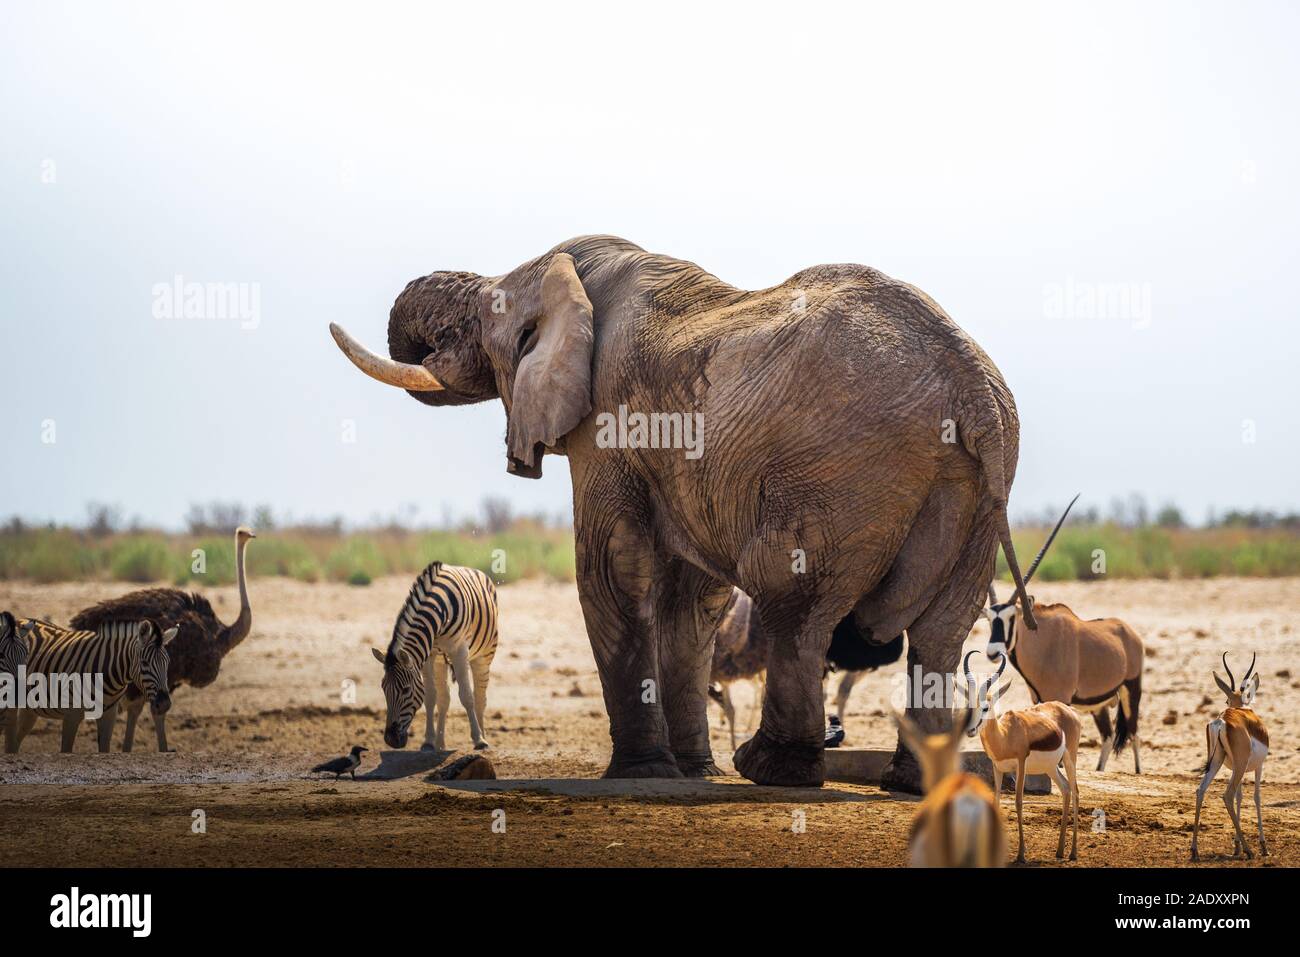 African elephant drinks water at a waterhole in Etosha National Park, Namibia, surrounded by other animals. Etosha is known for its waterholes overfil Stock Photo